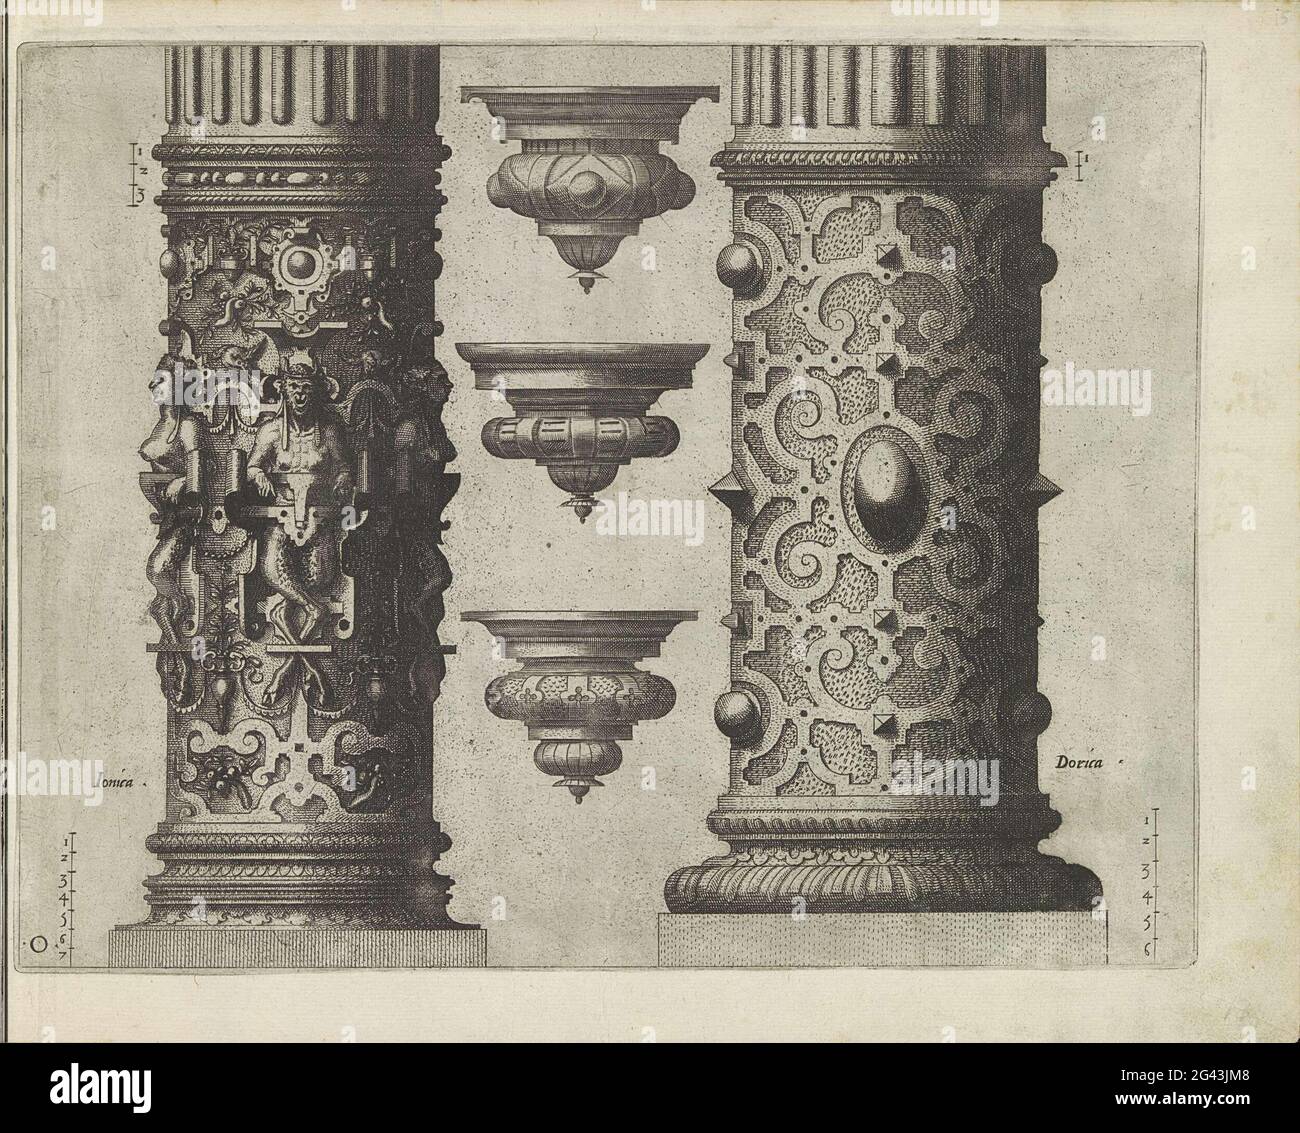 Two 'columnaeaelatae' and three consoles; The first Boeck Ghemaeckt on the two Colomba Dorica and Ionica. Two 'columnaealatae'. On the left the lower half of an ionic column decorated with Saters, caught in rollerwork. On the right the lower half of a doric column with fitting work and slender stones. Three consoles in the middle. A scale has been indicated twice on the print. Leaf O. The print is part of an album. Stock Photo